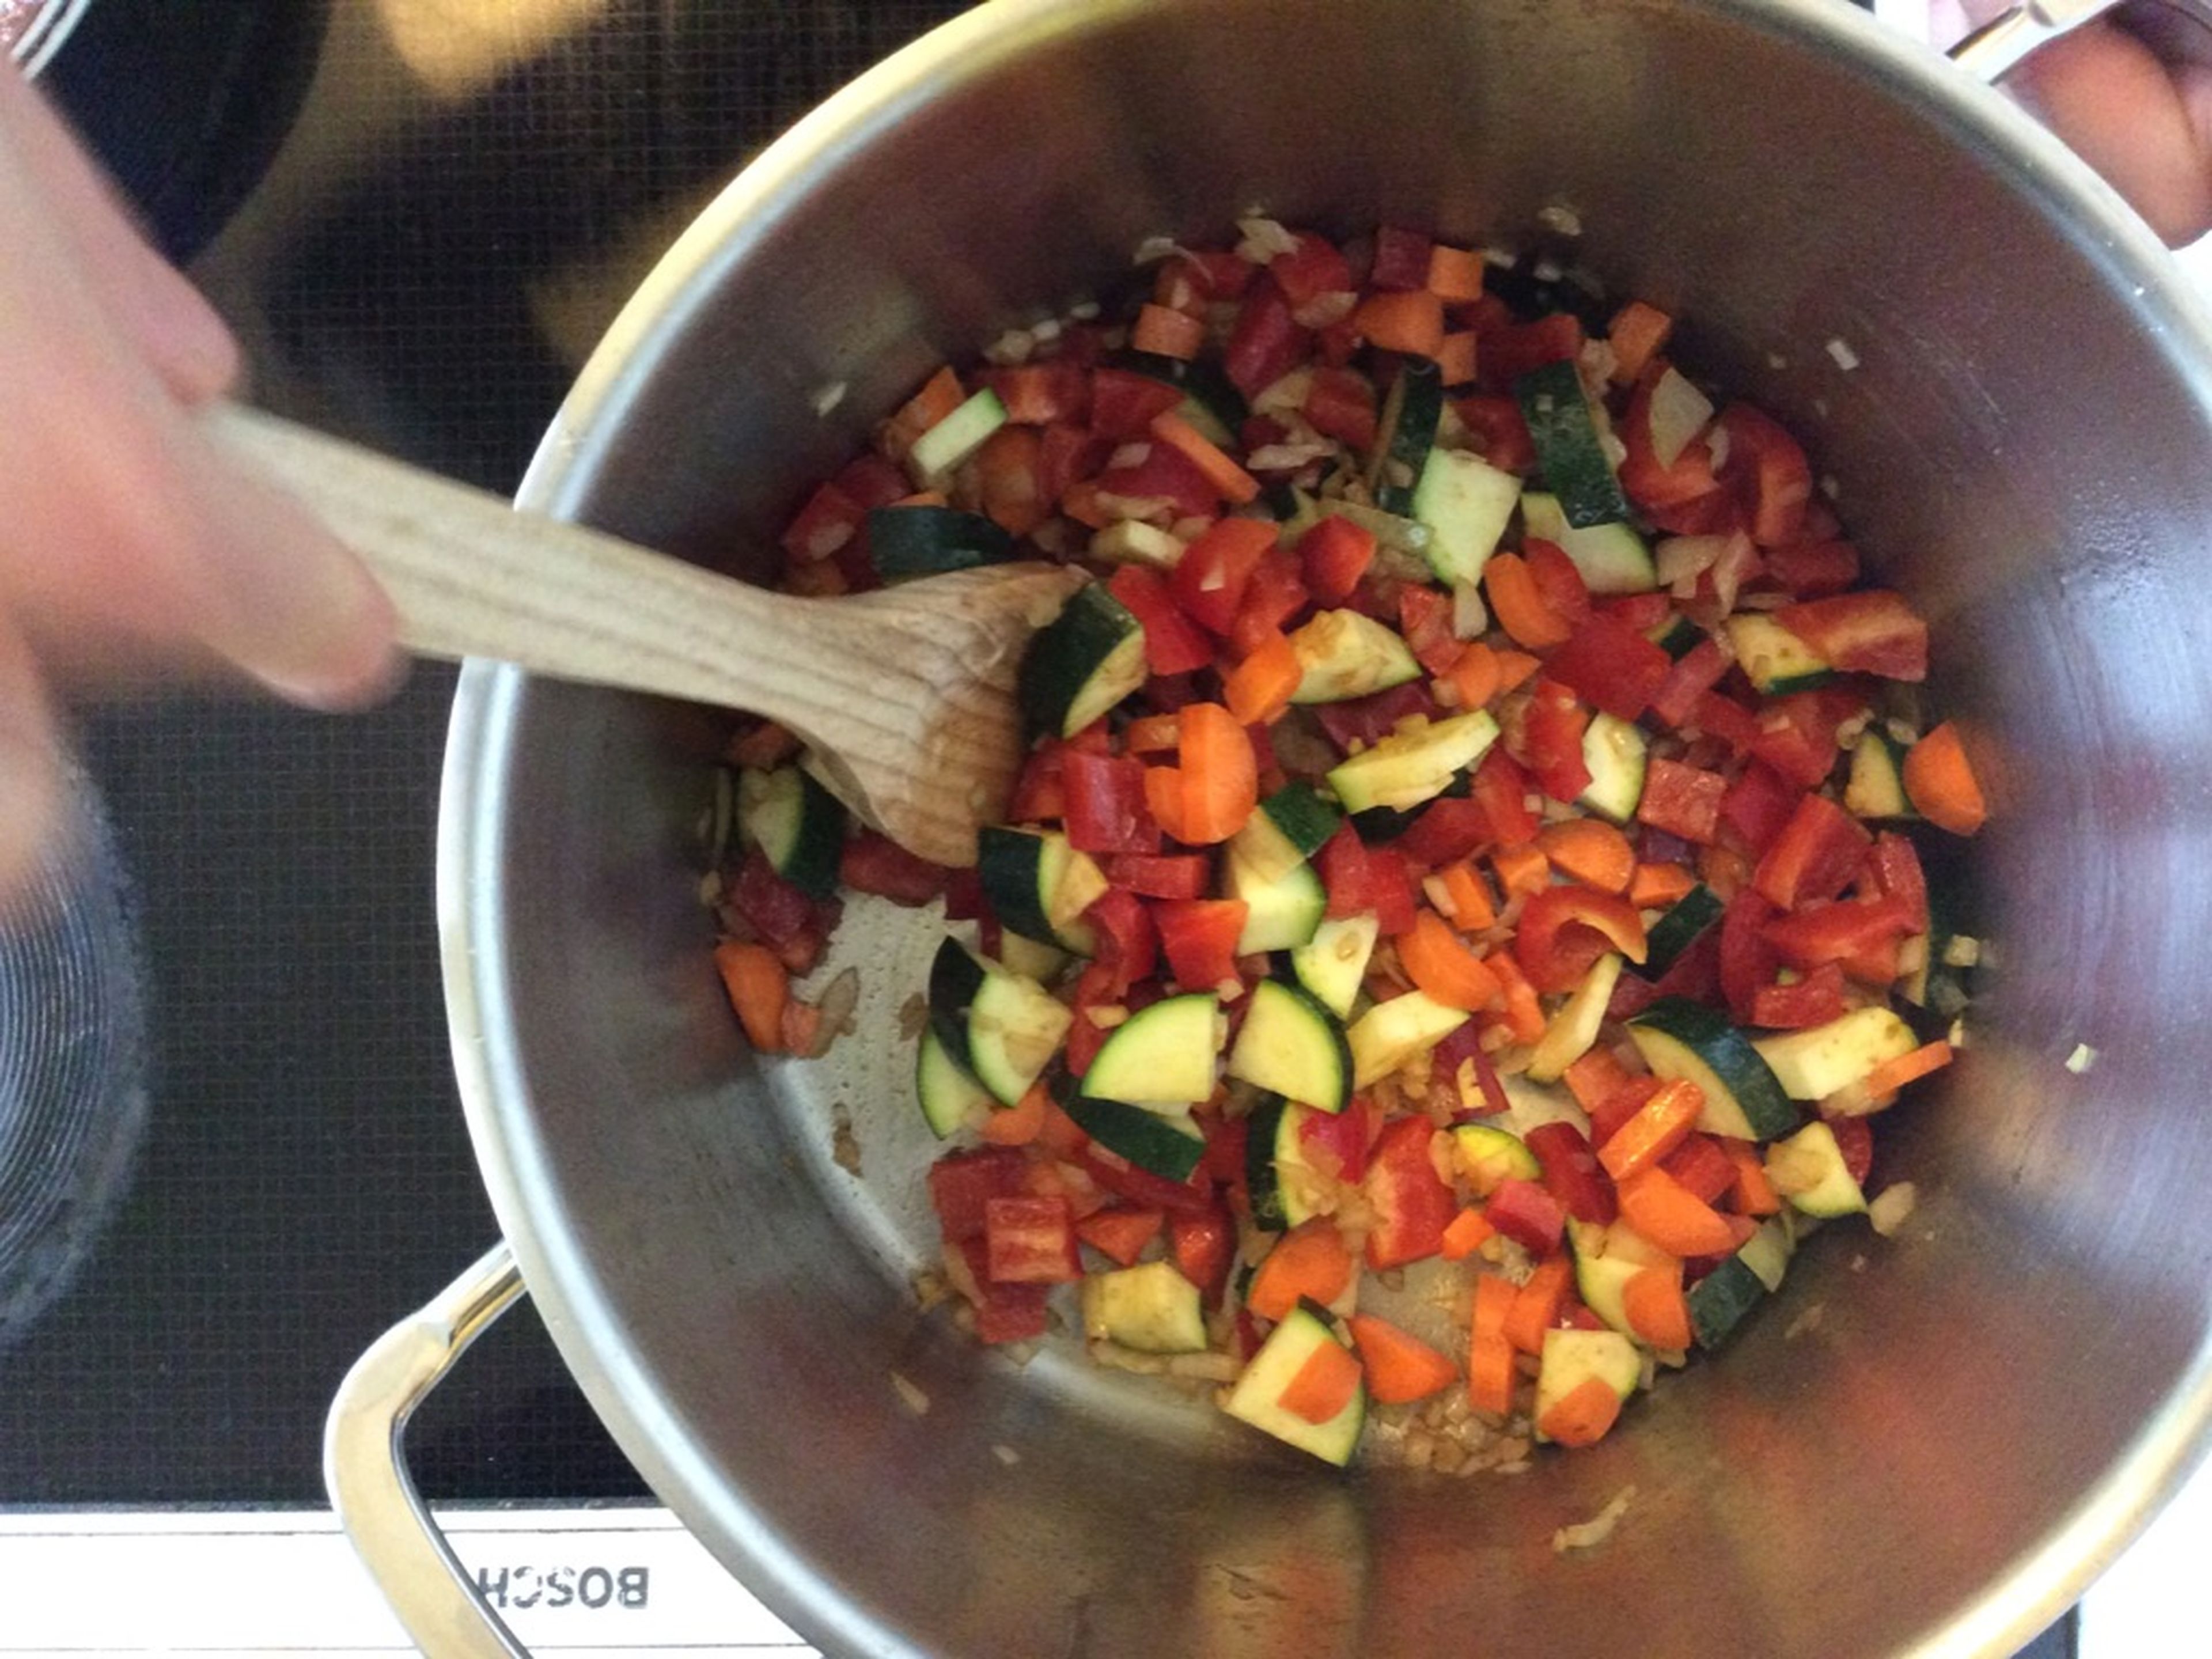 Add zucchini, carrots, and pepper and fry briefly. Now add tomatoes.